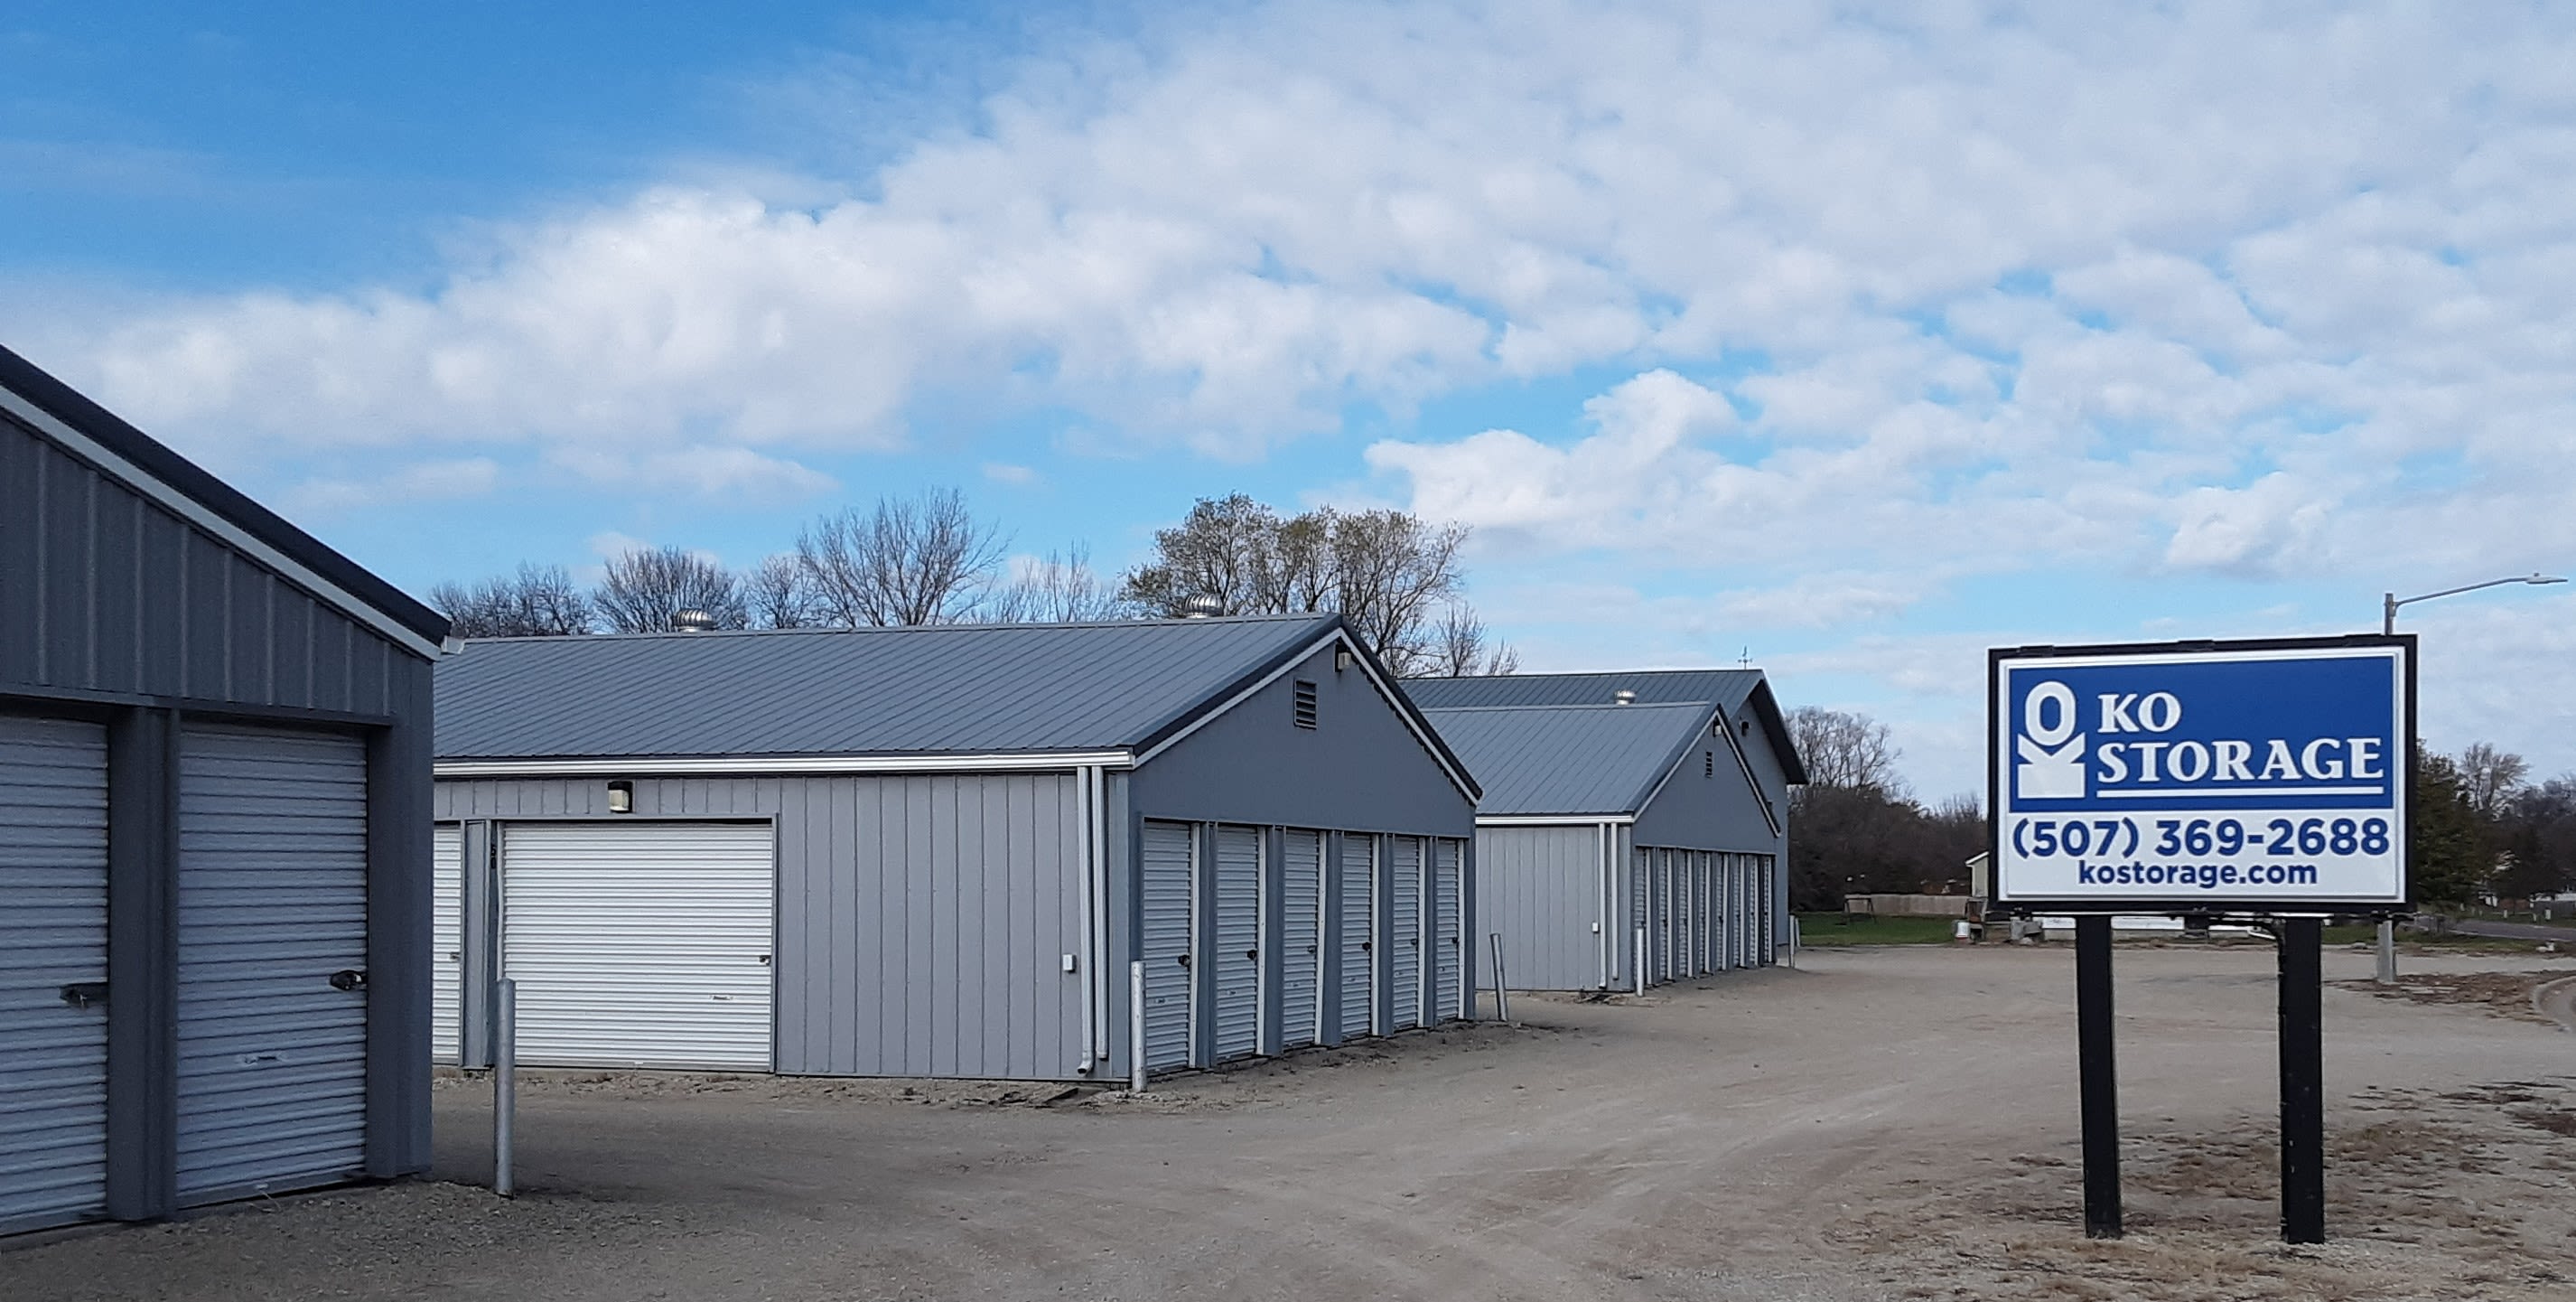 Unit size guide from KO Storage in Waseca, Minnesota